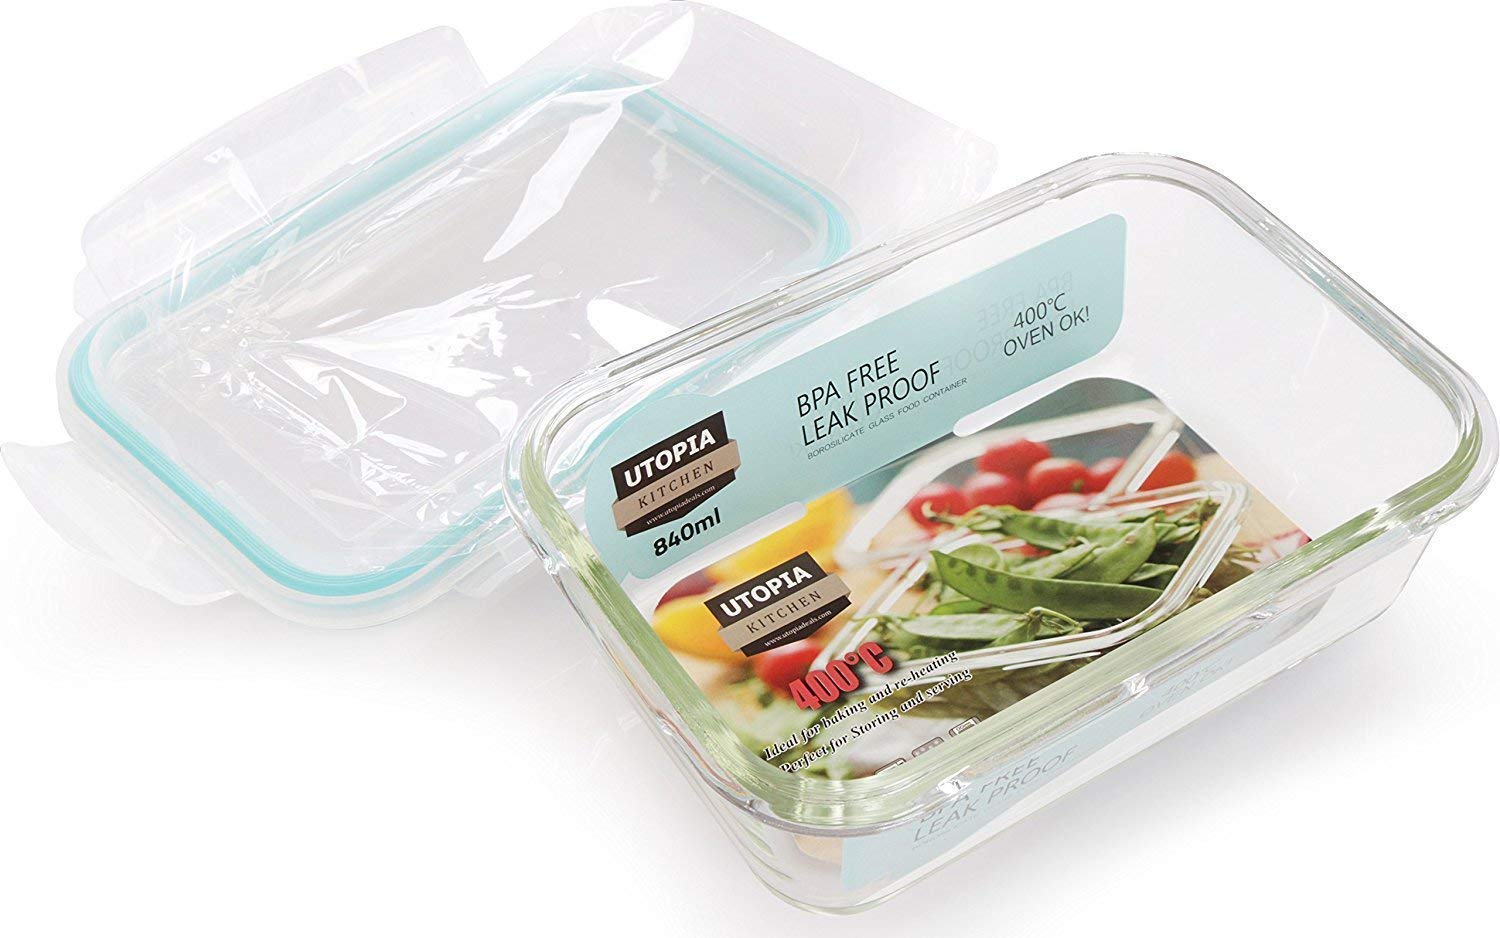 Utopia Kitchen Glass Food Storage Container Set - 18 Pieces (9 Containers  and 9 Lids) - Transparent Lids - BPA Free